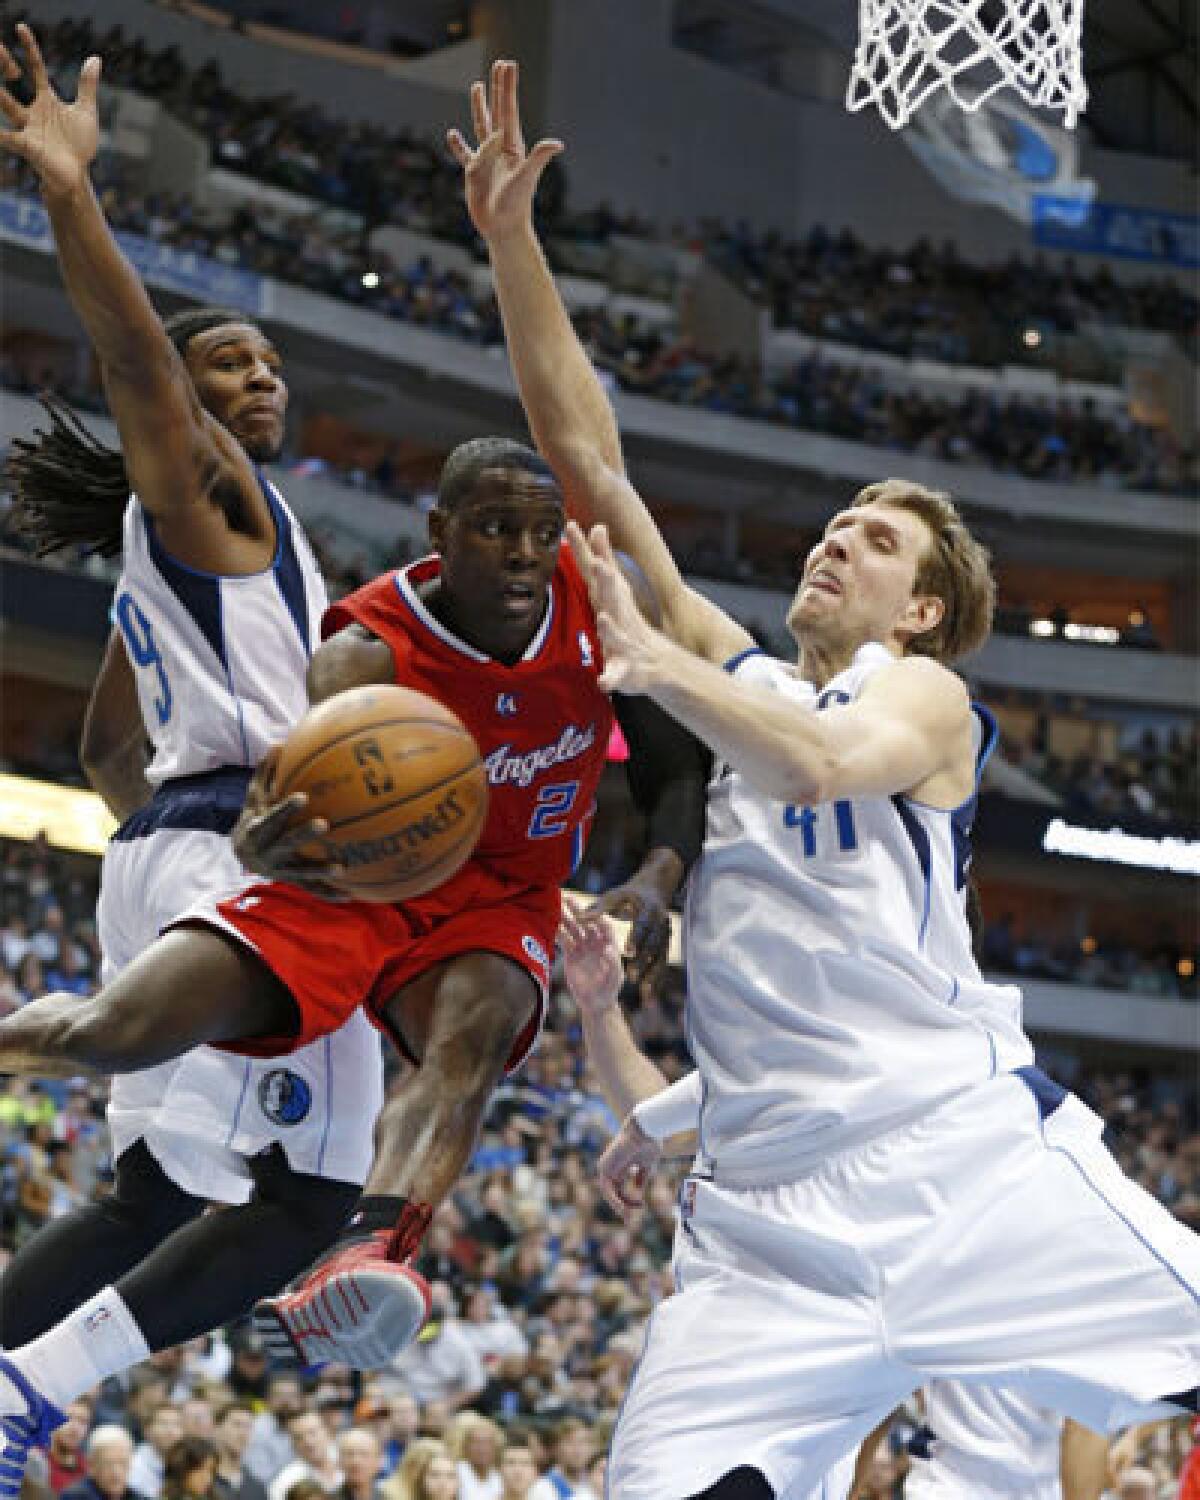 Dallas forwards Jae Crowder, left, and Dirk Nowitzki defend as Clippers guard Darren Collison looks to pass back in January.